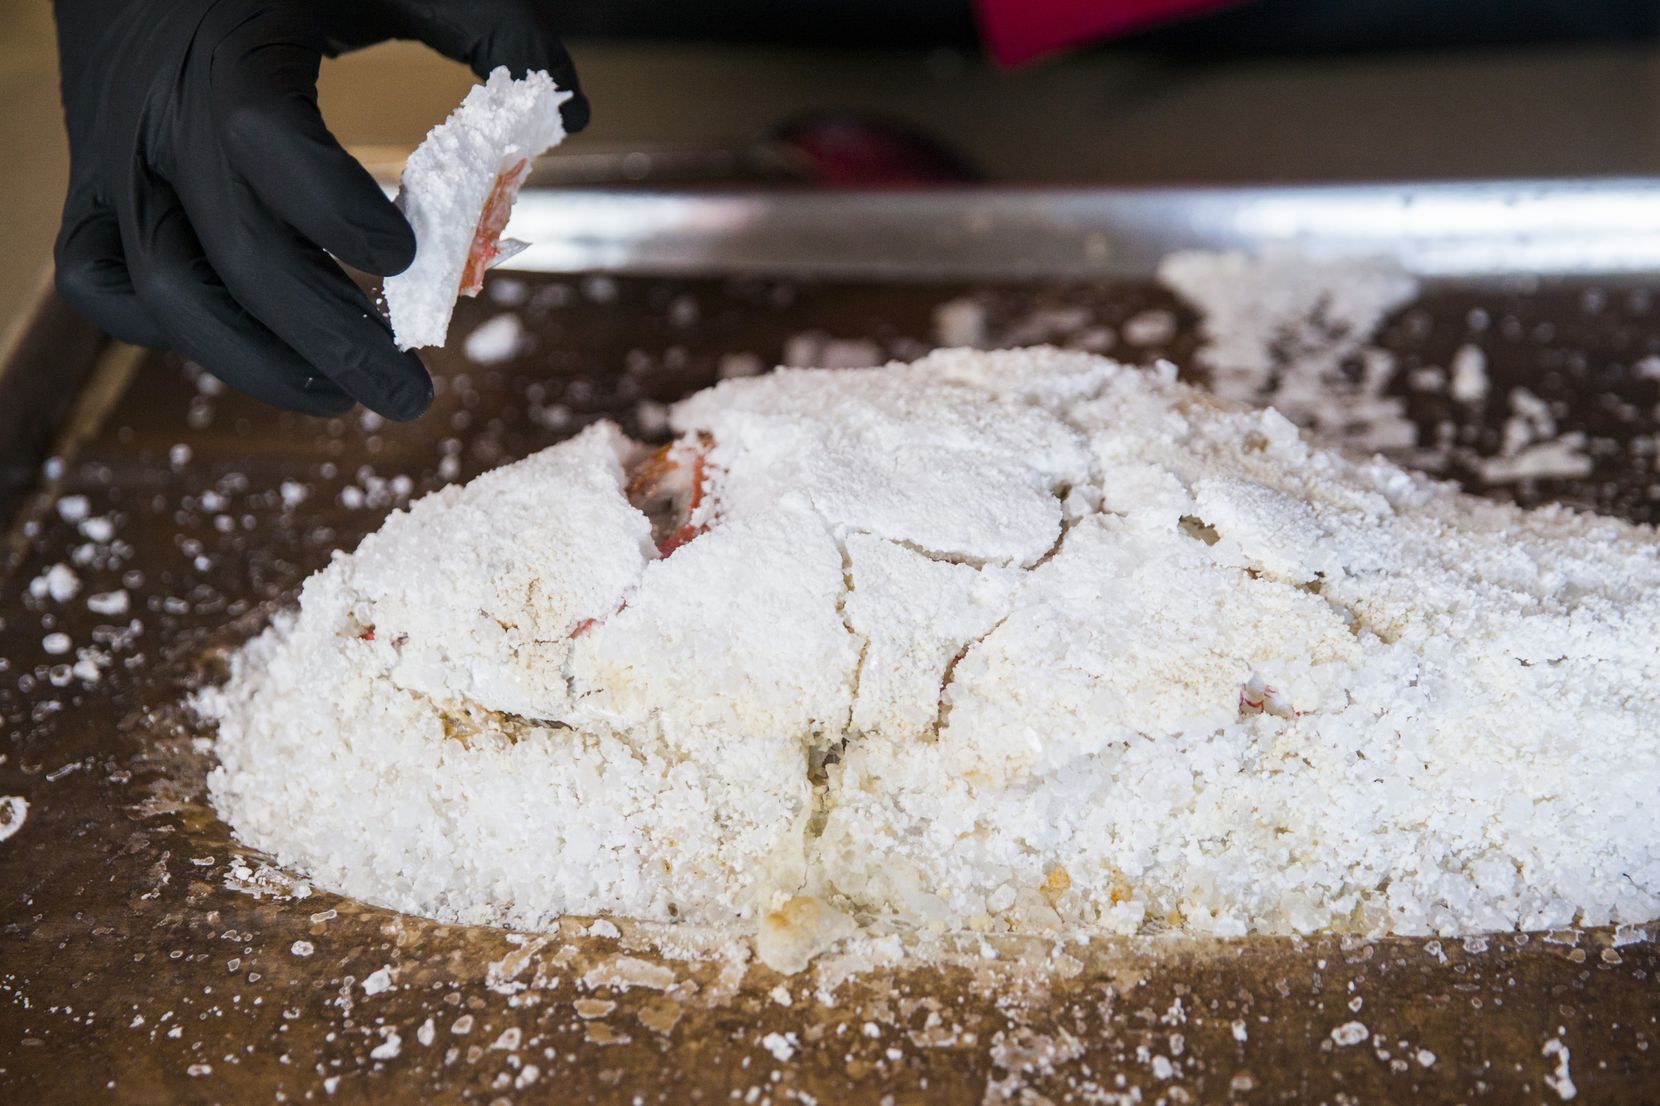 Chef and co-owner Ryan Oruch pulls the salt crust away from the red snapper after baking.